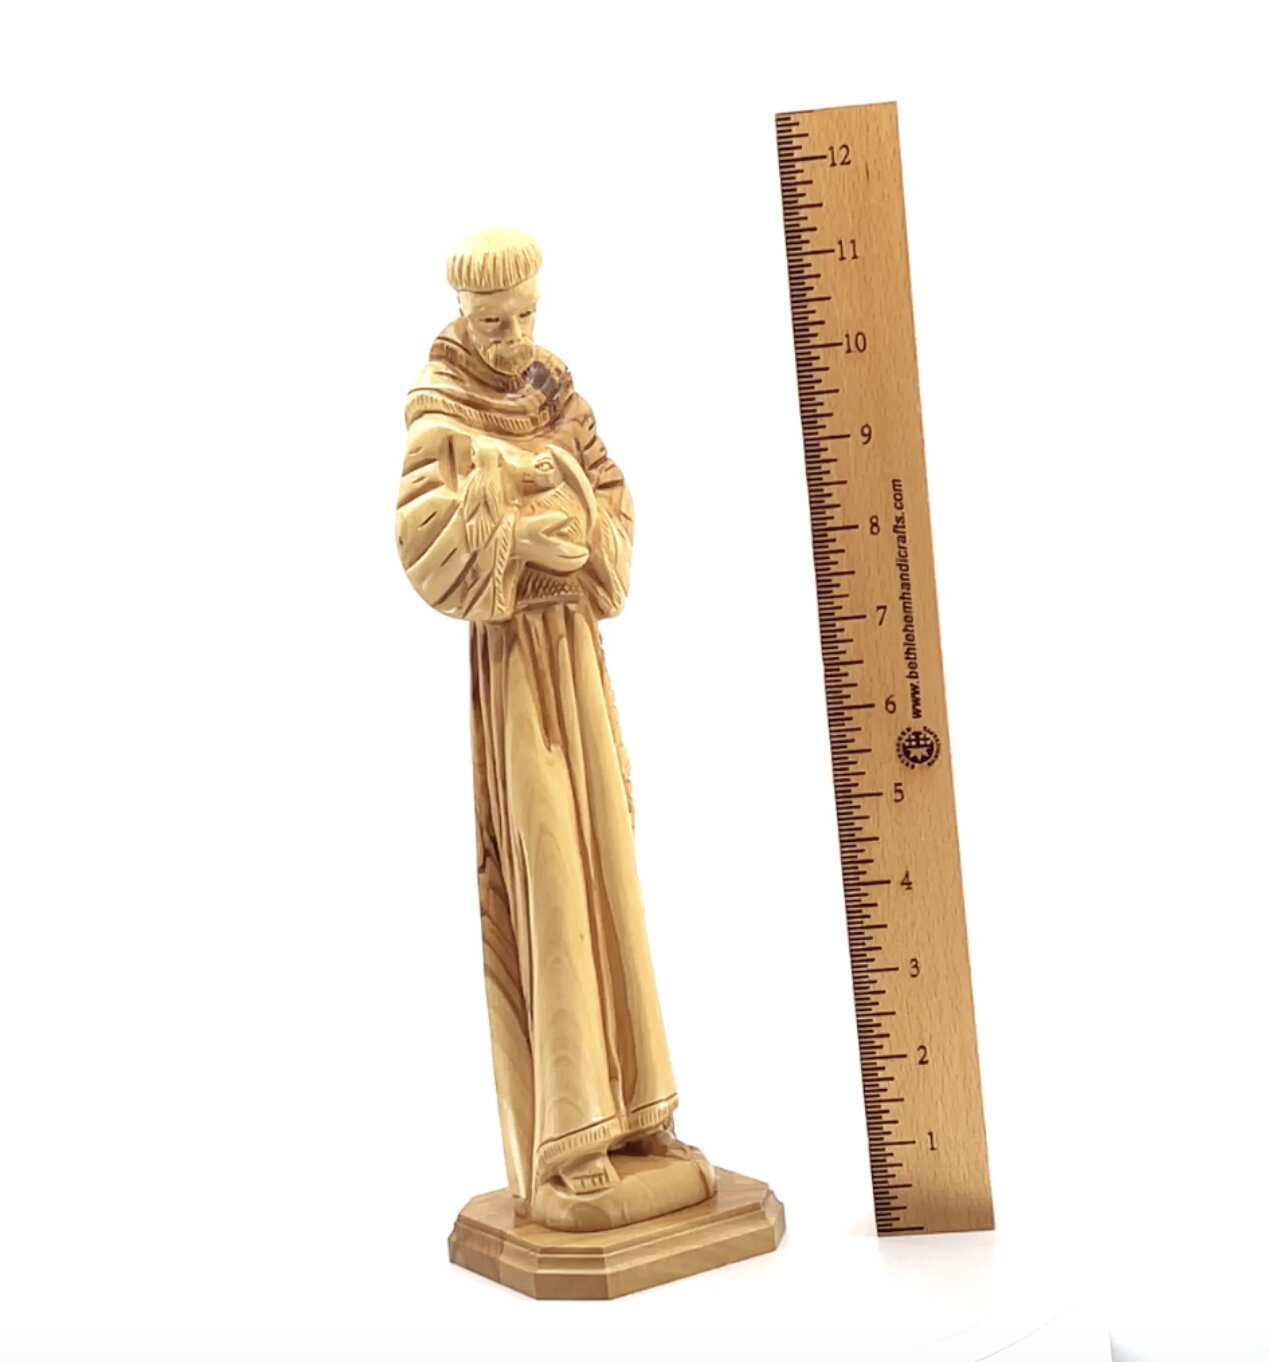 Francis of Assisi, Patron Saint of Ecology, 11.4" Tall Carved Statue